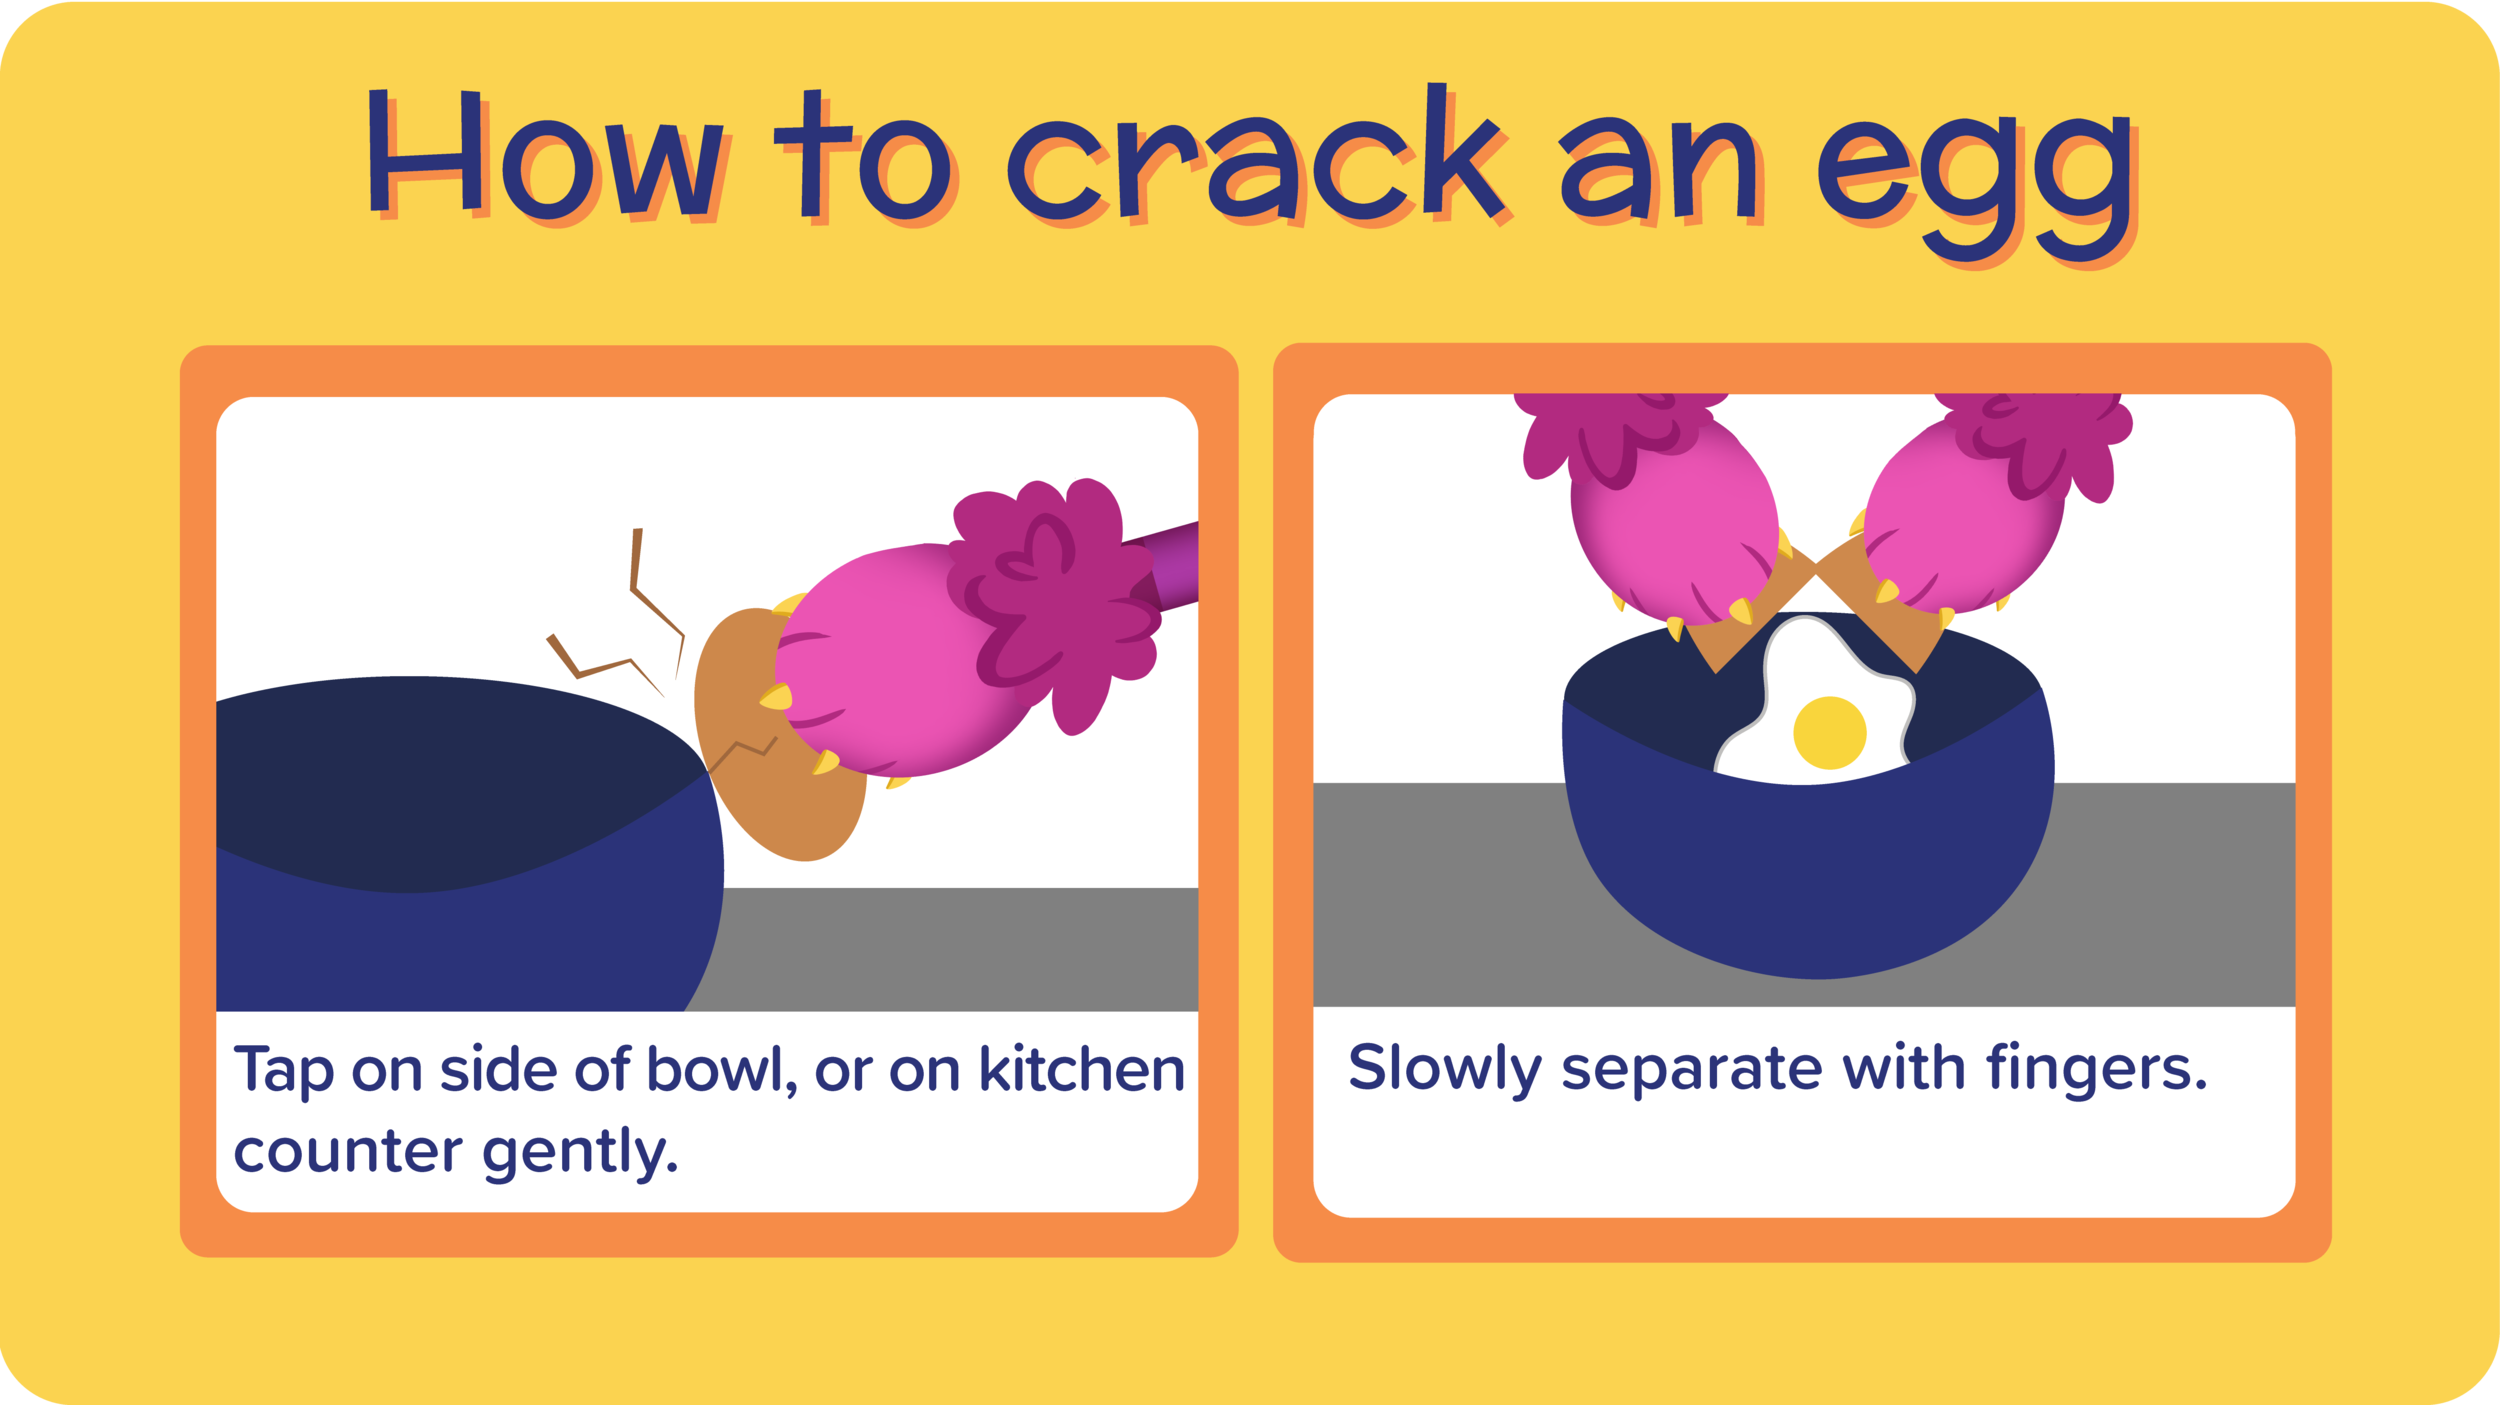 18_ChocolateChipZucchiniBananaBread_How to crack egg-01.png